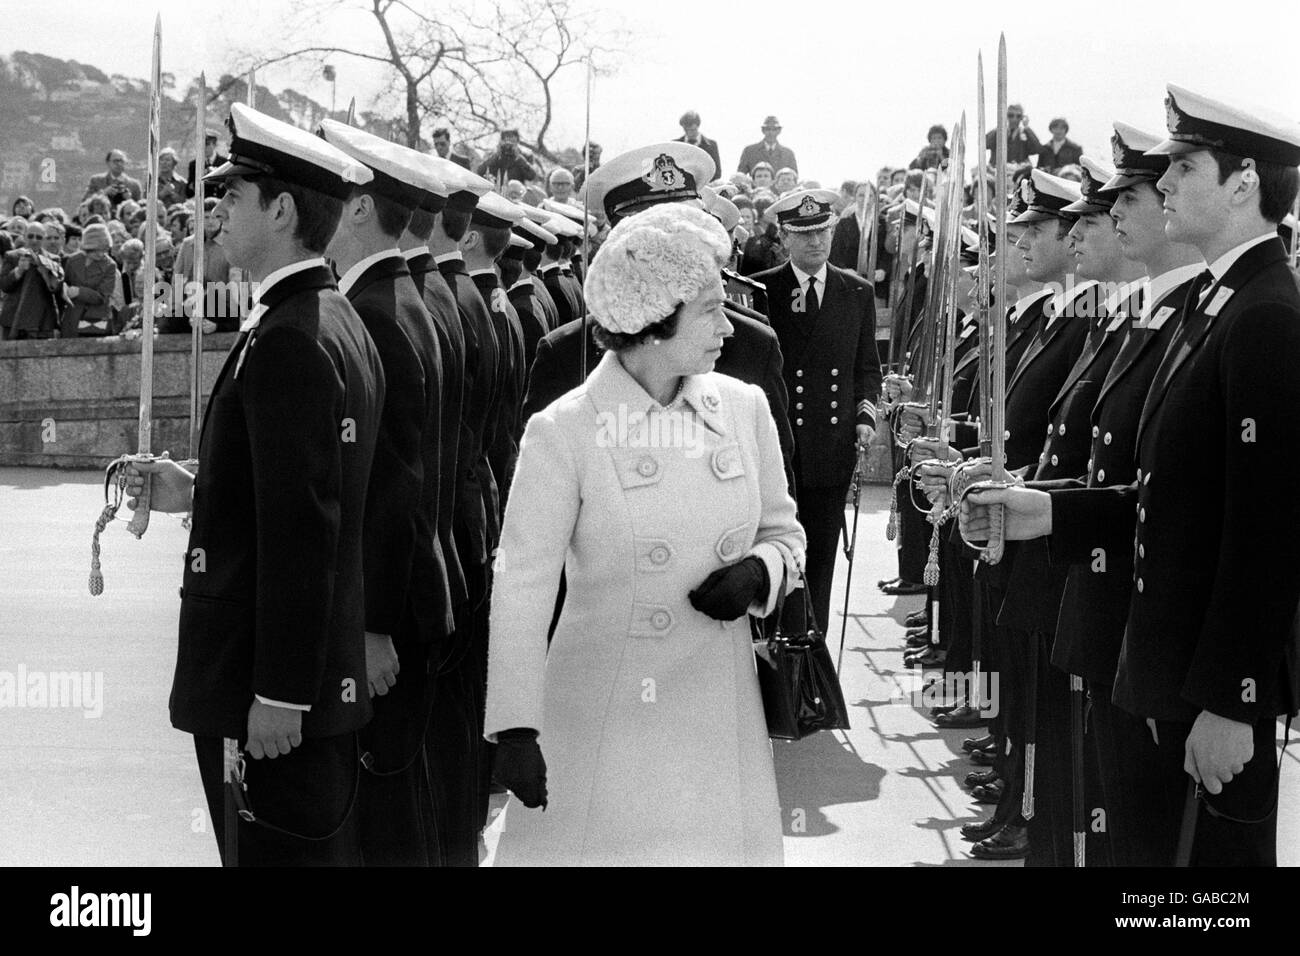 The Queen at Britannia Royal Naval College, inspecting the passing out parade, which included her 20 year old son, Prince Andrew (front row), who has just completed his seven months' Midshipmen's training. Stock Photo